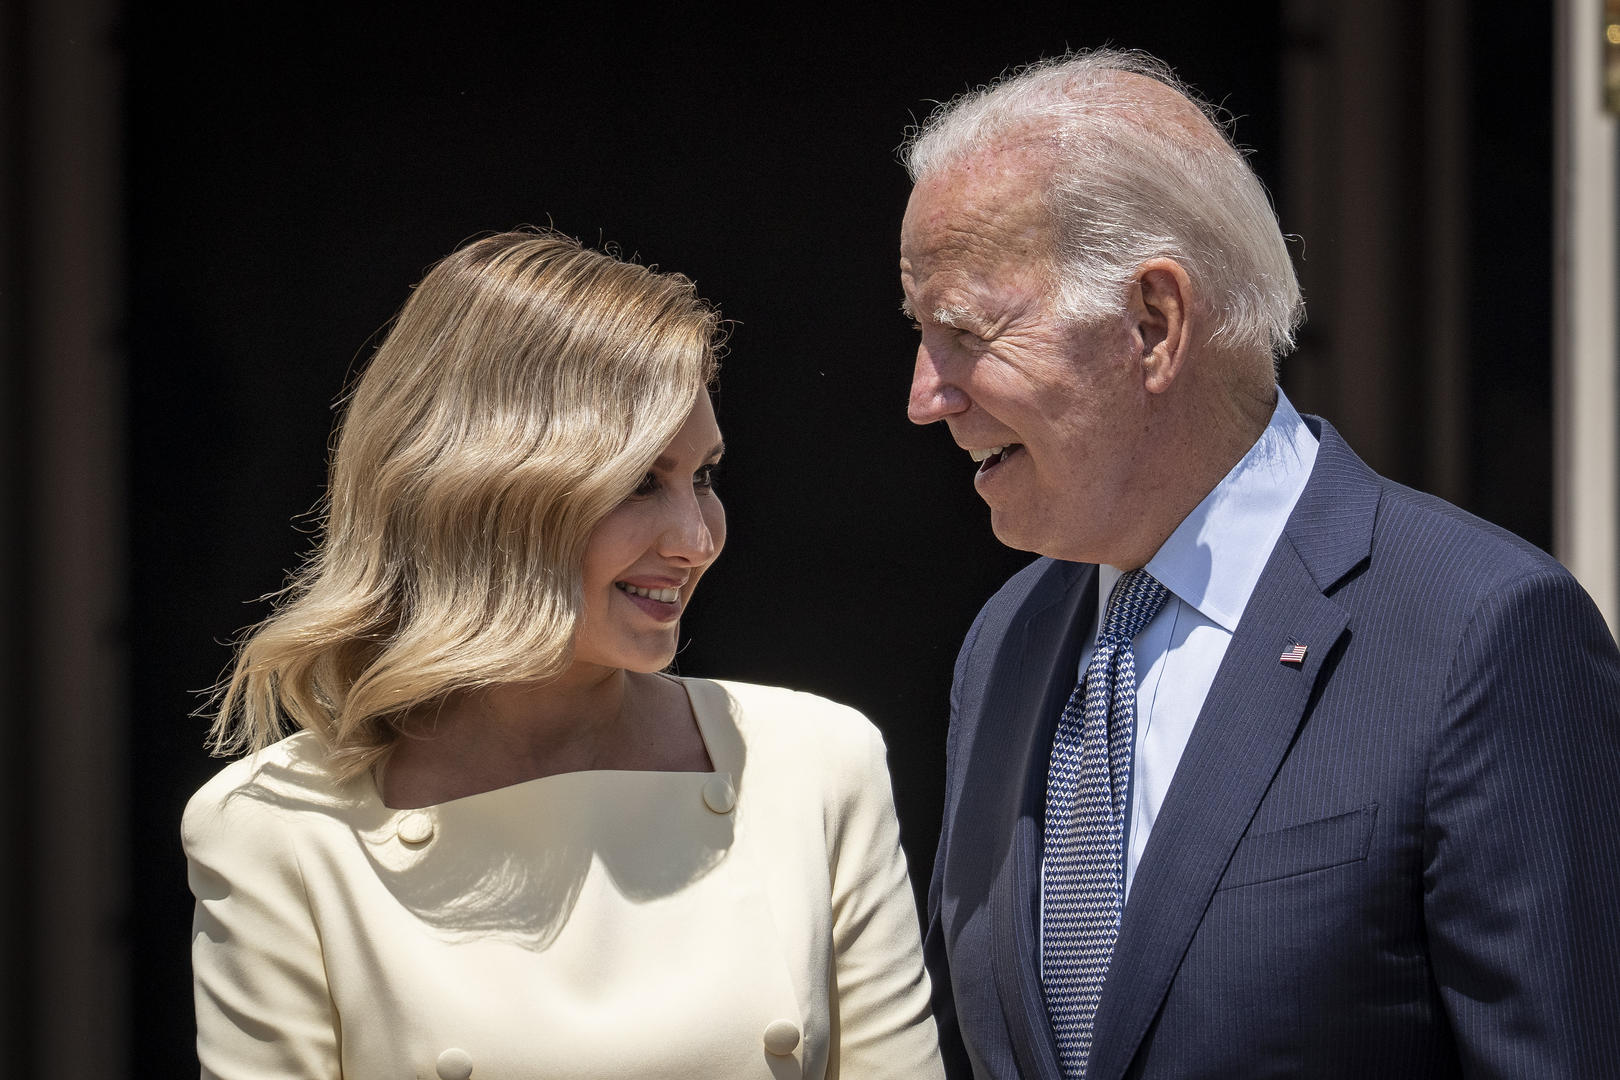 Biden on 2024 plans: "Our intention is to run again"